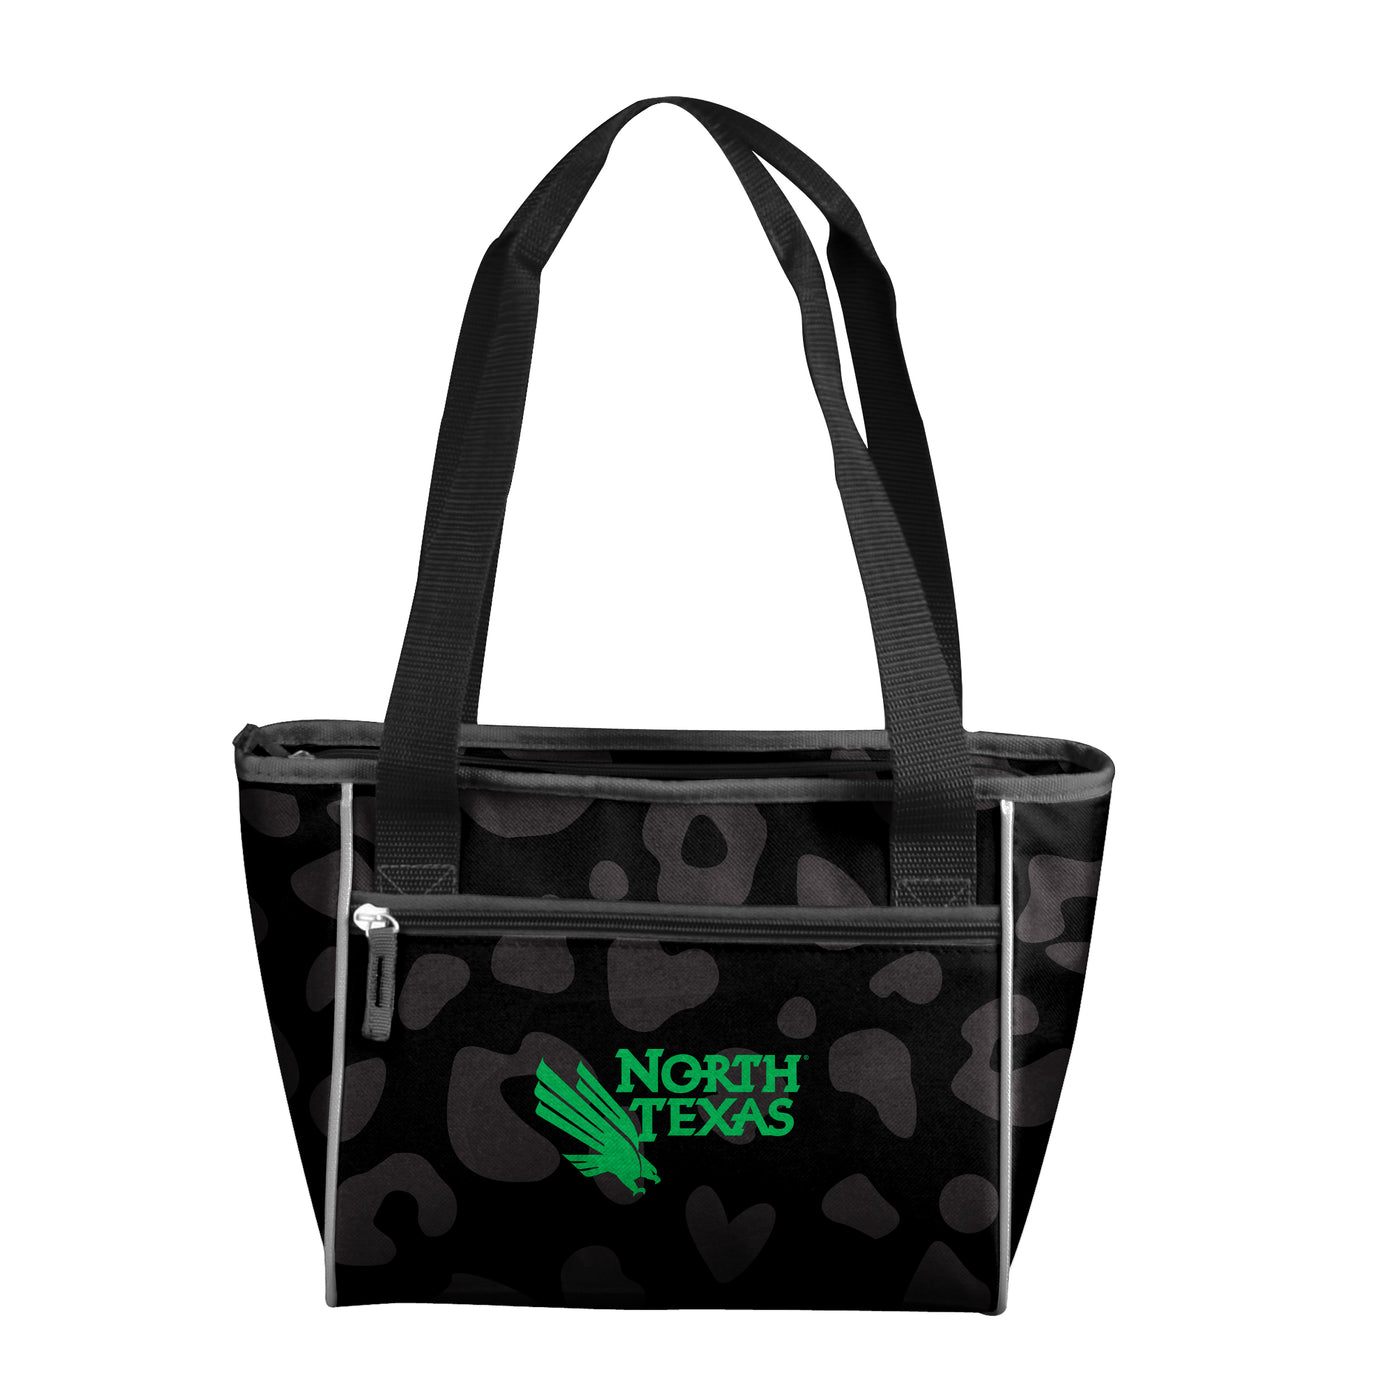 North Texas Leopard Print 16 Can Cooler Tote